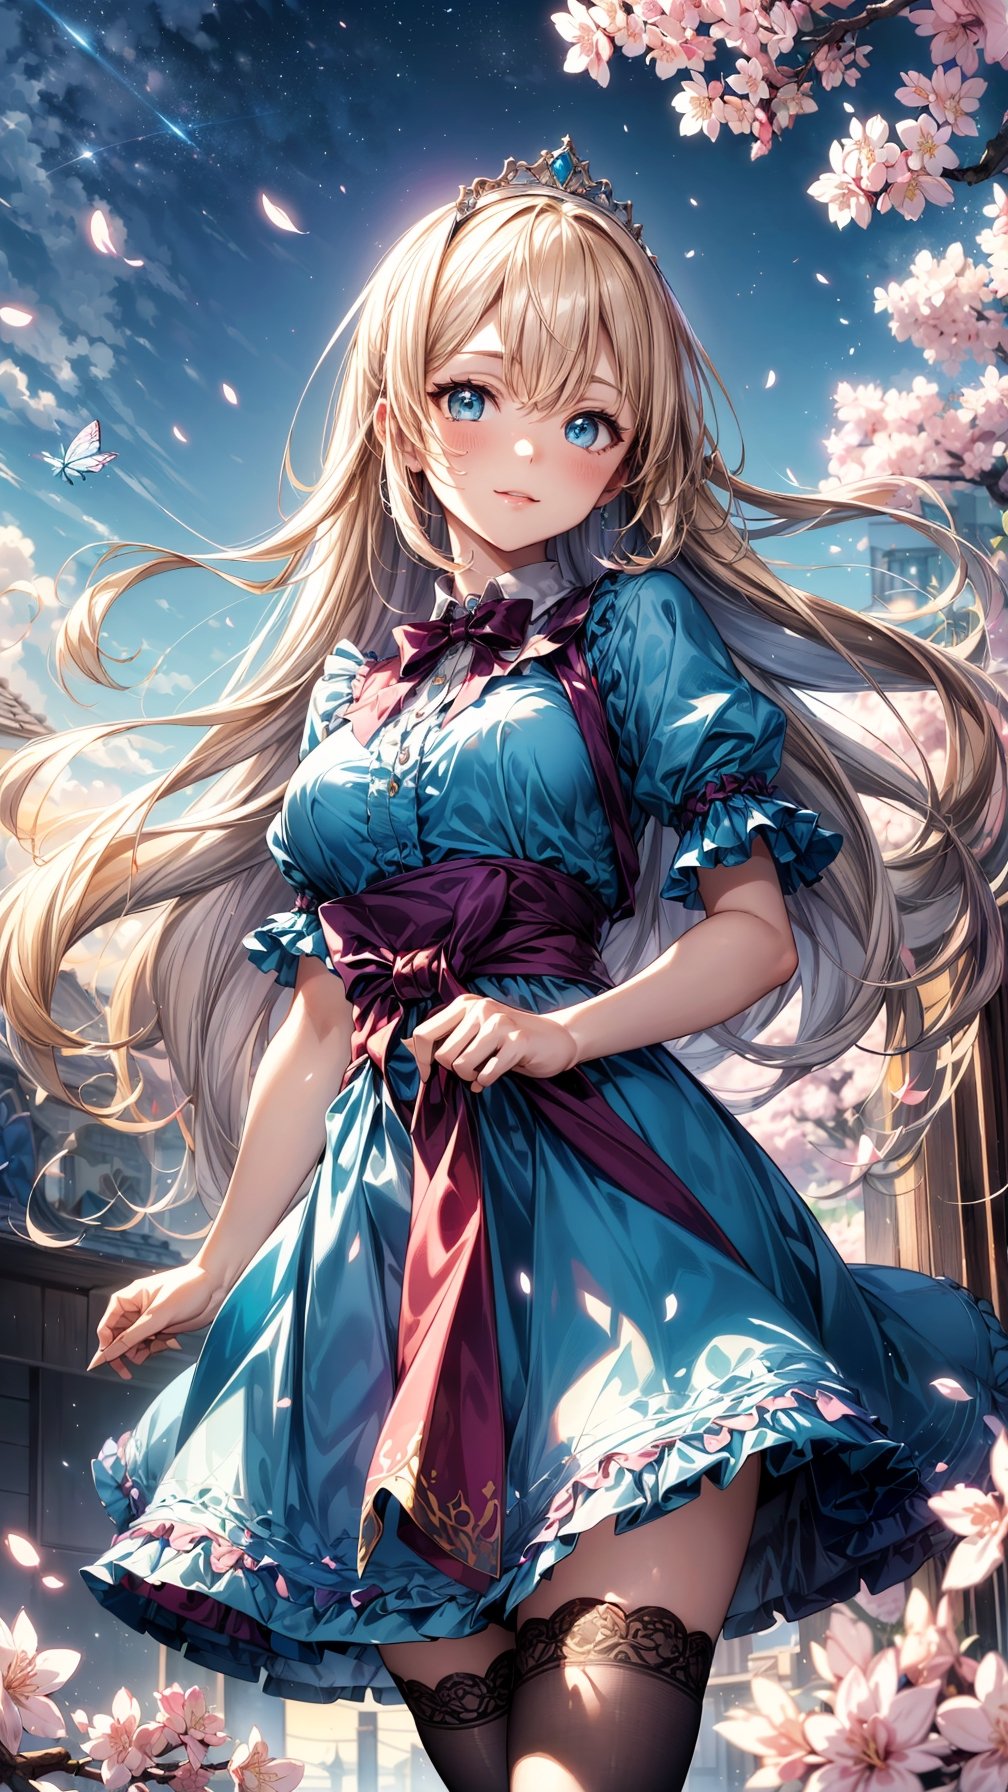 (best quality, masterpiece, illustration, designer, lighting), (extremely detailed CG 8k wallpaper unit), (detailed and expressive eyes), detailed particles, beautiful lighting, a cute girl, long blonde hair, wearing a teddy bear tiara, donning a beautiful blue and white dress with ruffles and lace, sheer pink stockings, transparent aquamarine crystal shoes, bows around her waist (Alice in Wonderland), butterflies around, (Pixiv anime style),(manga style), ((floating in sky)), flowy dress, ((cherry blossoms falling around her)), colorful, sky, stars, celestial body, atmosphere, (dreamy world:1.4),cinematic shot, low angle shot, High contrast, smooth,Detailedface,perfecteyes,light smile,